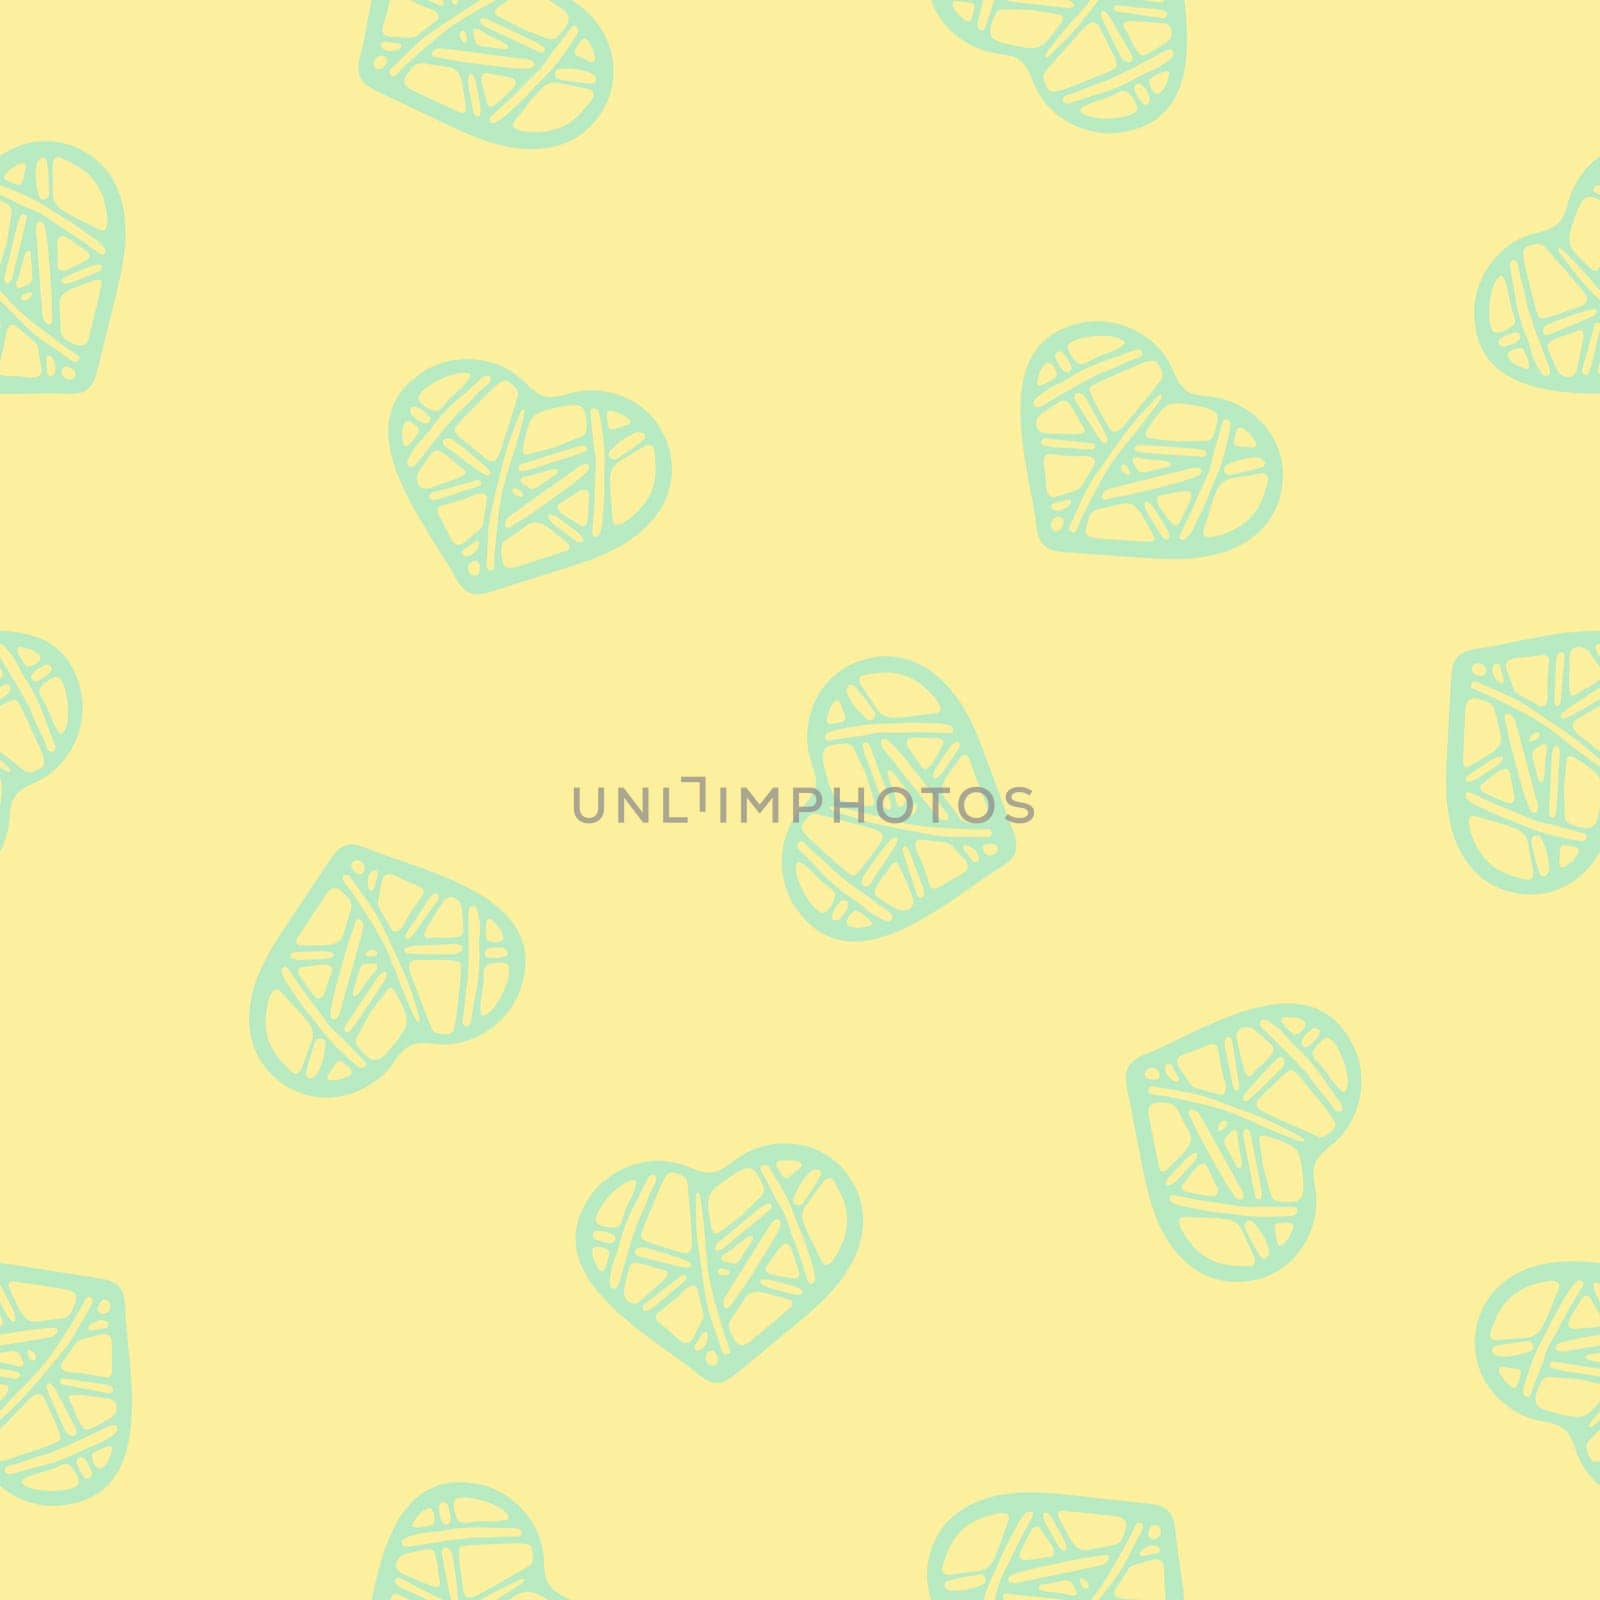 Hand Drawn Seamless Patterns with Hearts in Doodle Style. Romantic Love Digital Paper for Valentines Day. Colorful Hearts on Yellow Pastel Background.